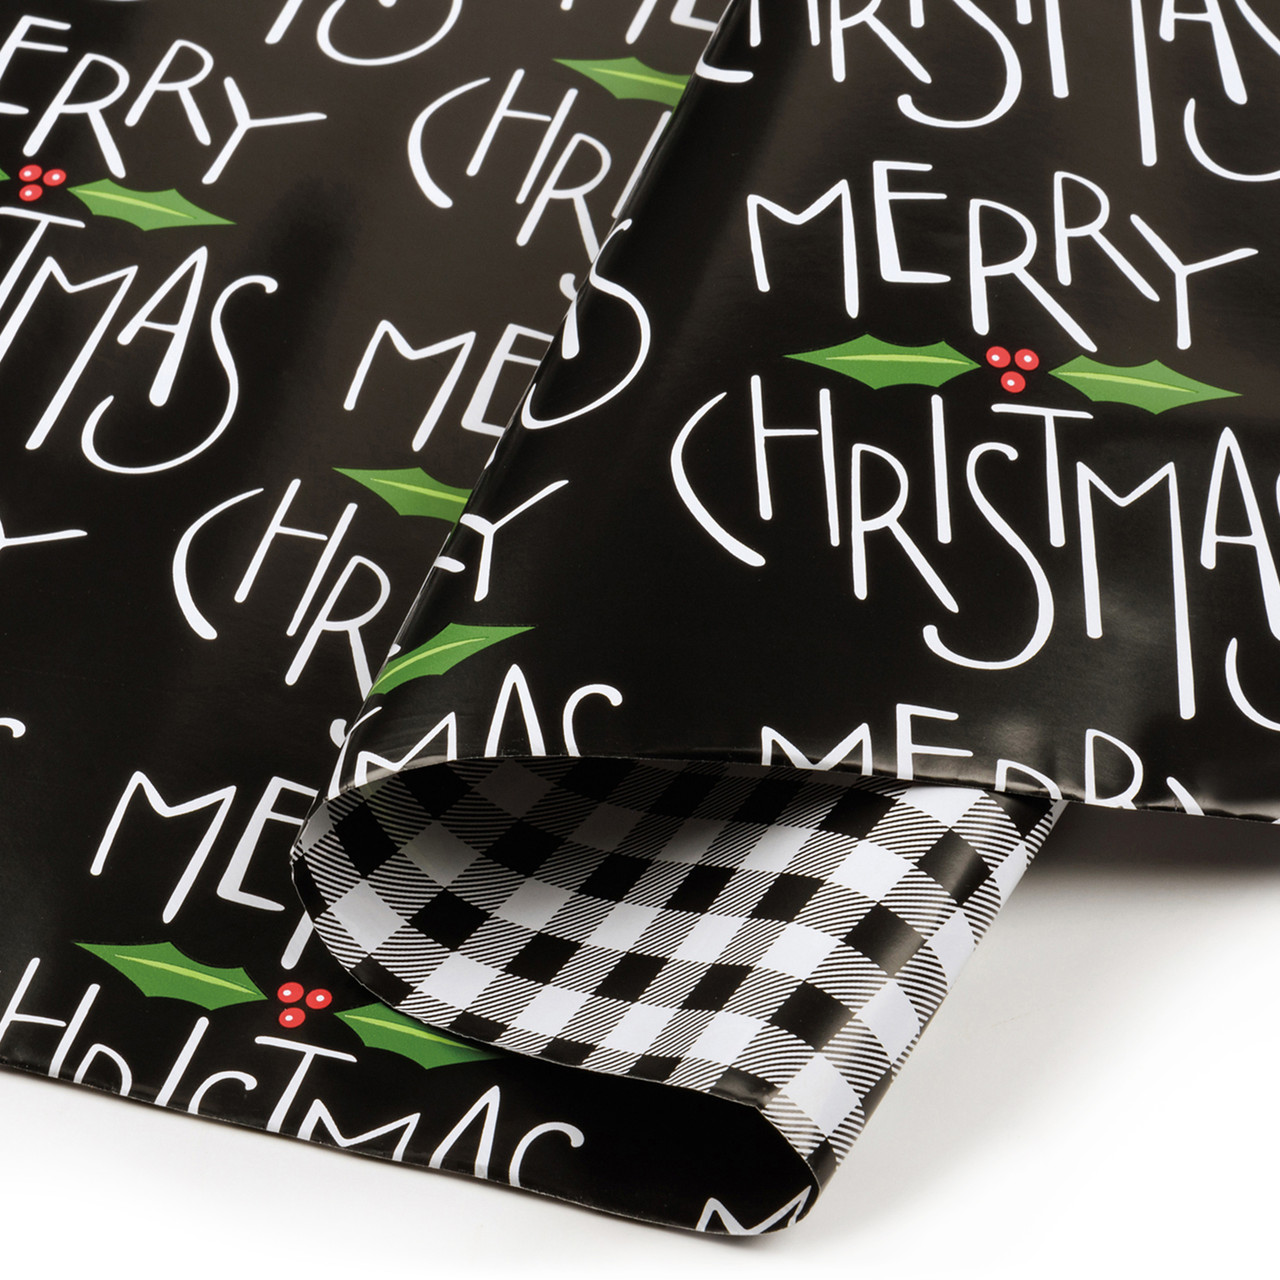 Double Sided Gift Wrapping Paper Roll - Merry Christmas Mistletoe & White  Black Plaid - 9.75 Feet x 30 Inch from Primitives by Kathy